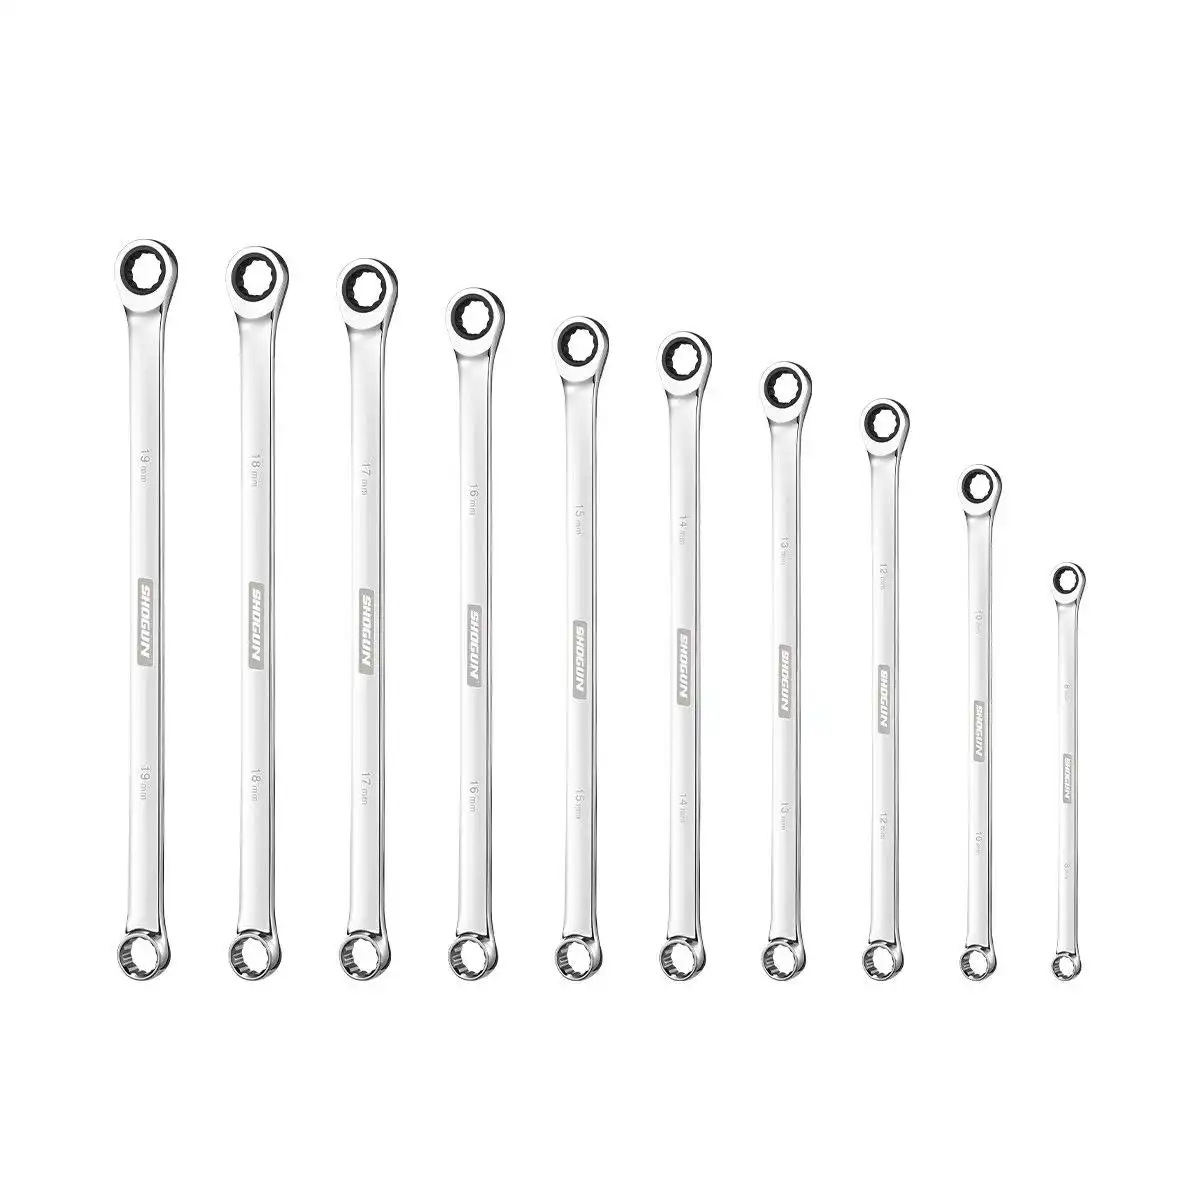 Shogun 10 PCS Extra Long Double Ring Cr-V Ratchet Spanner Set 72 Tooth Wrench Tool